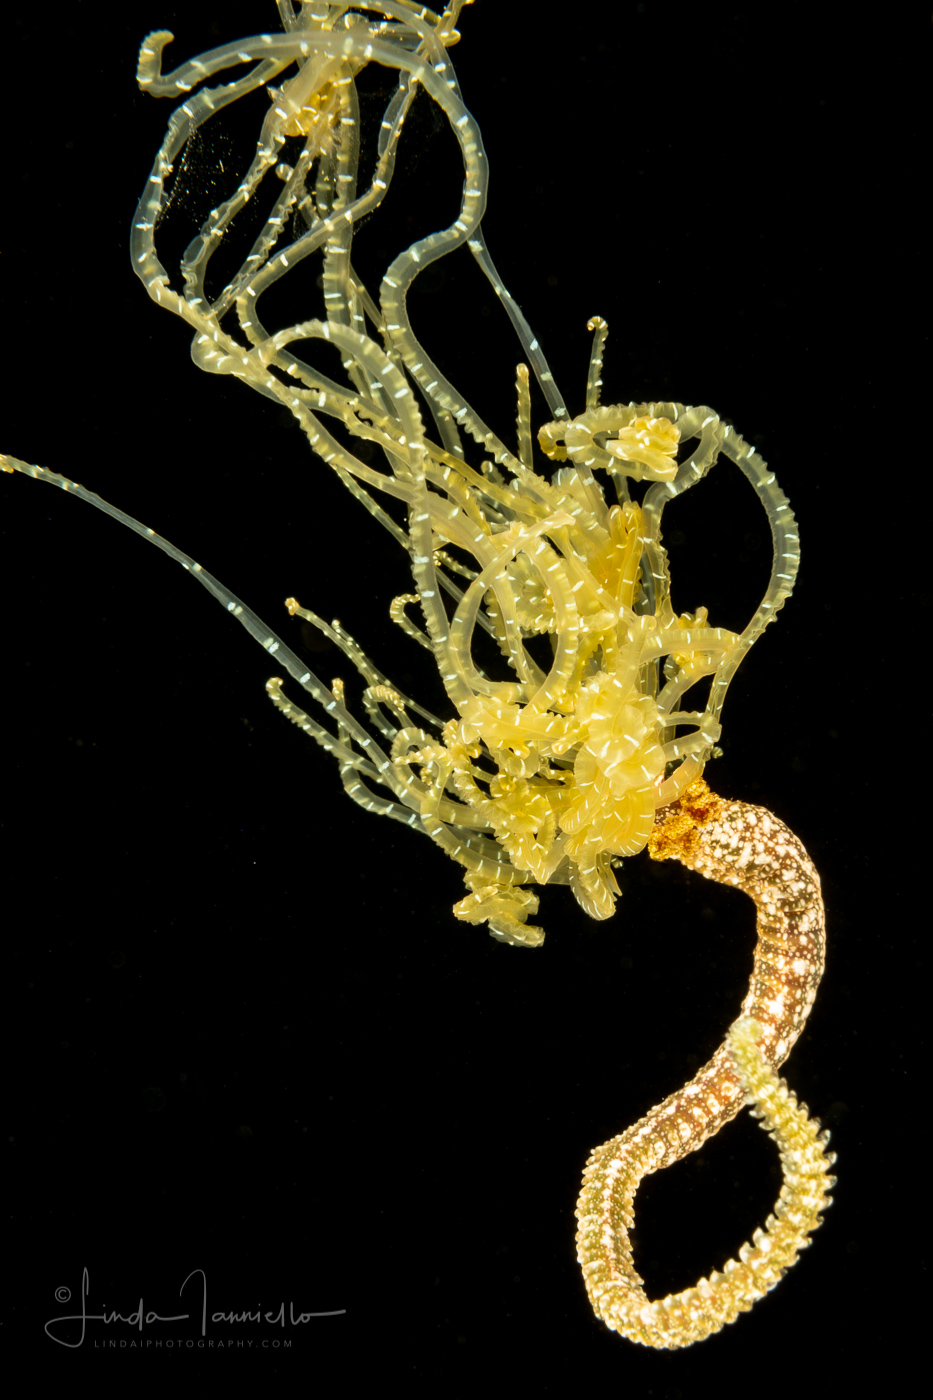 Polychaete Worm - Maybe Terebellid